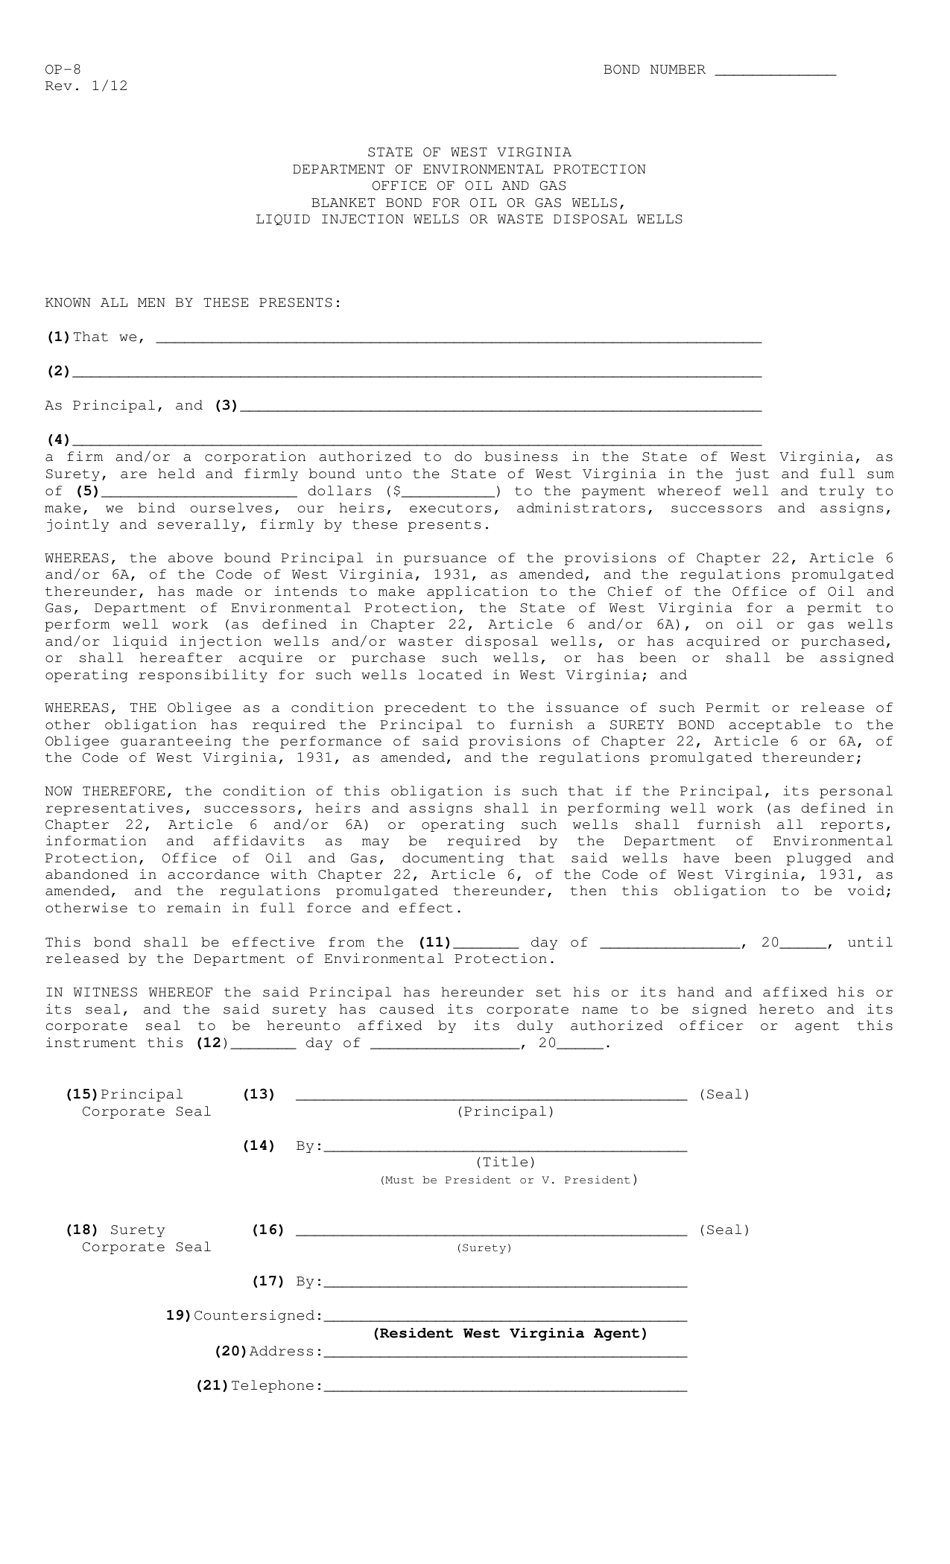 Form OP-8 Blanket Bond for Oil or Gas Wells, Liquid Injection Wells or Waste Disposal Wells - West Virginia, Page 1